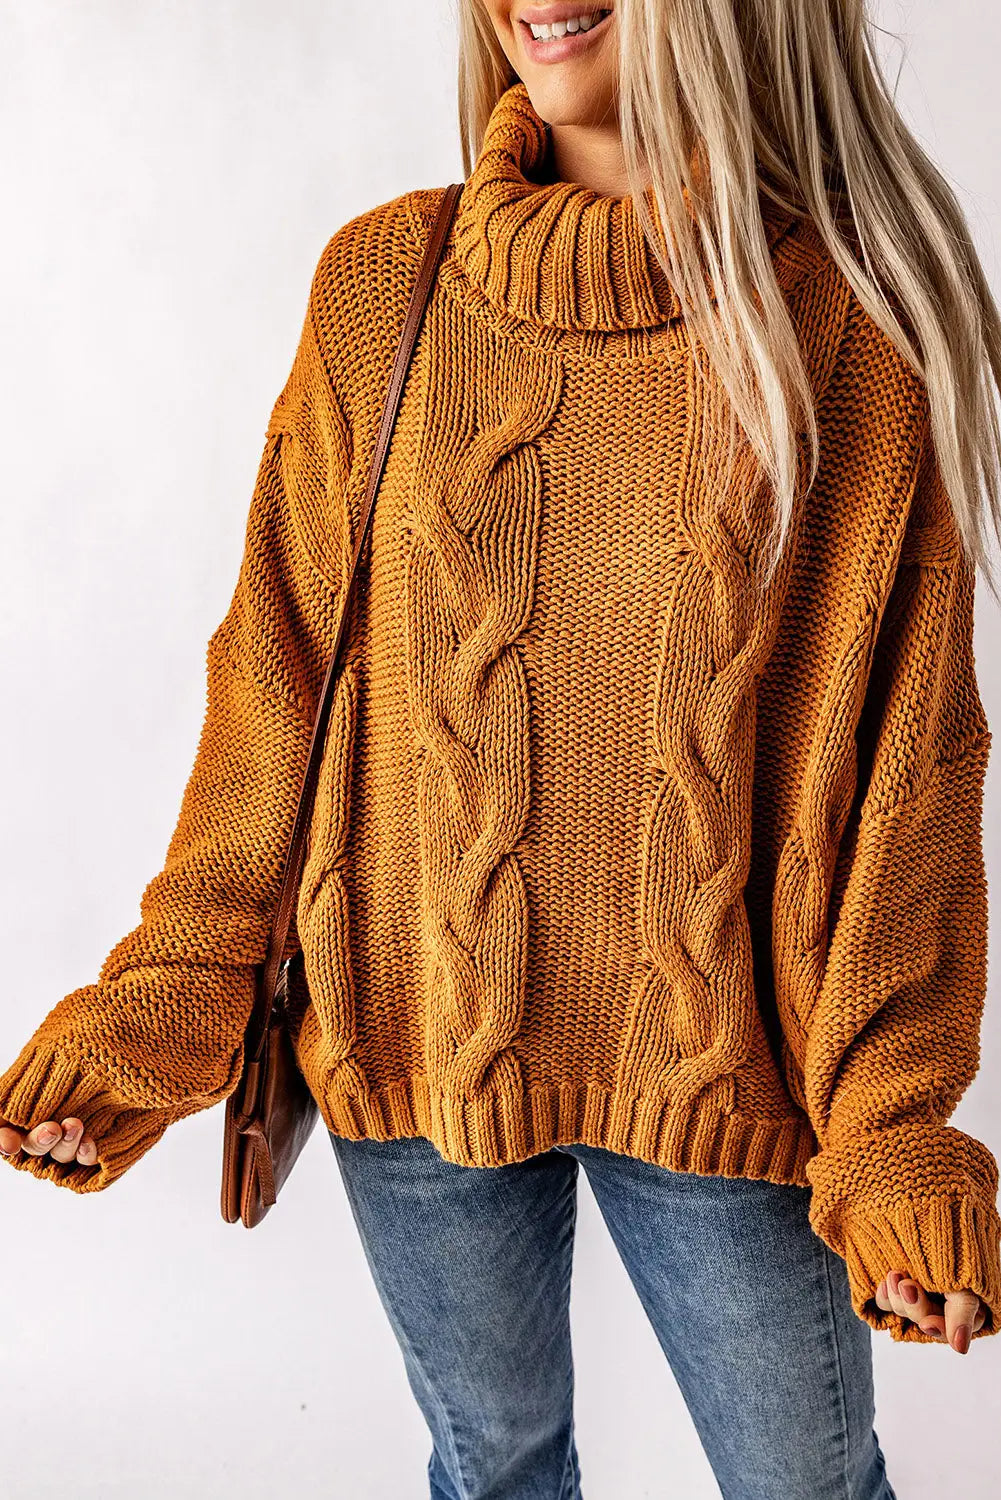 Cuddle weather cable knit handmade turtleneck sweater - yellow-2 / xs / 60% cotton + 40% acrylic - sweaters & cardigans